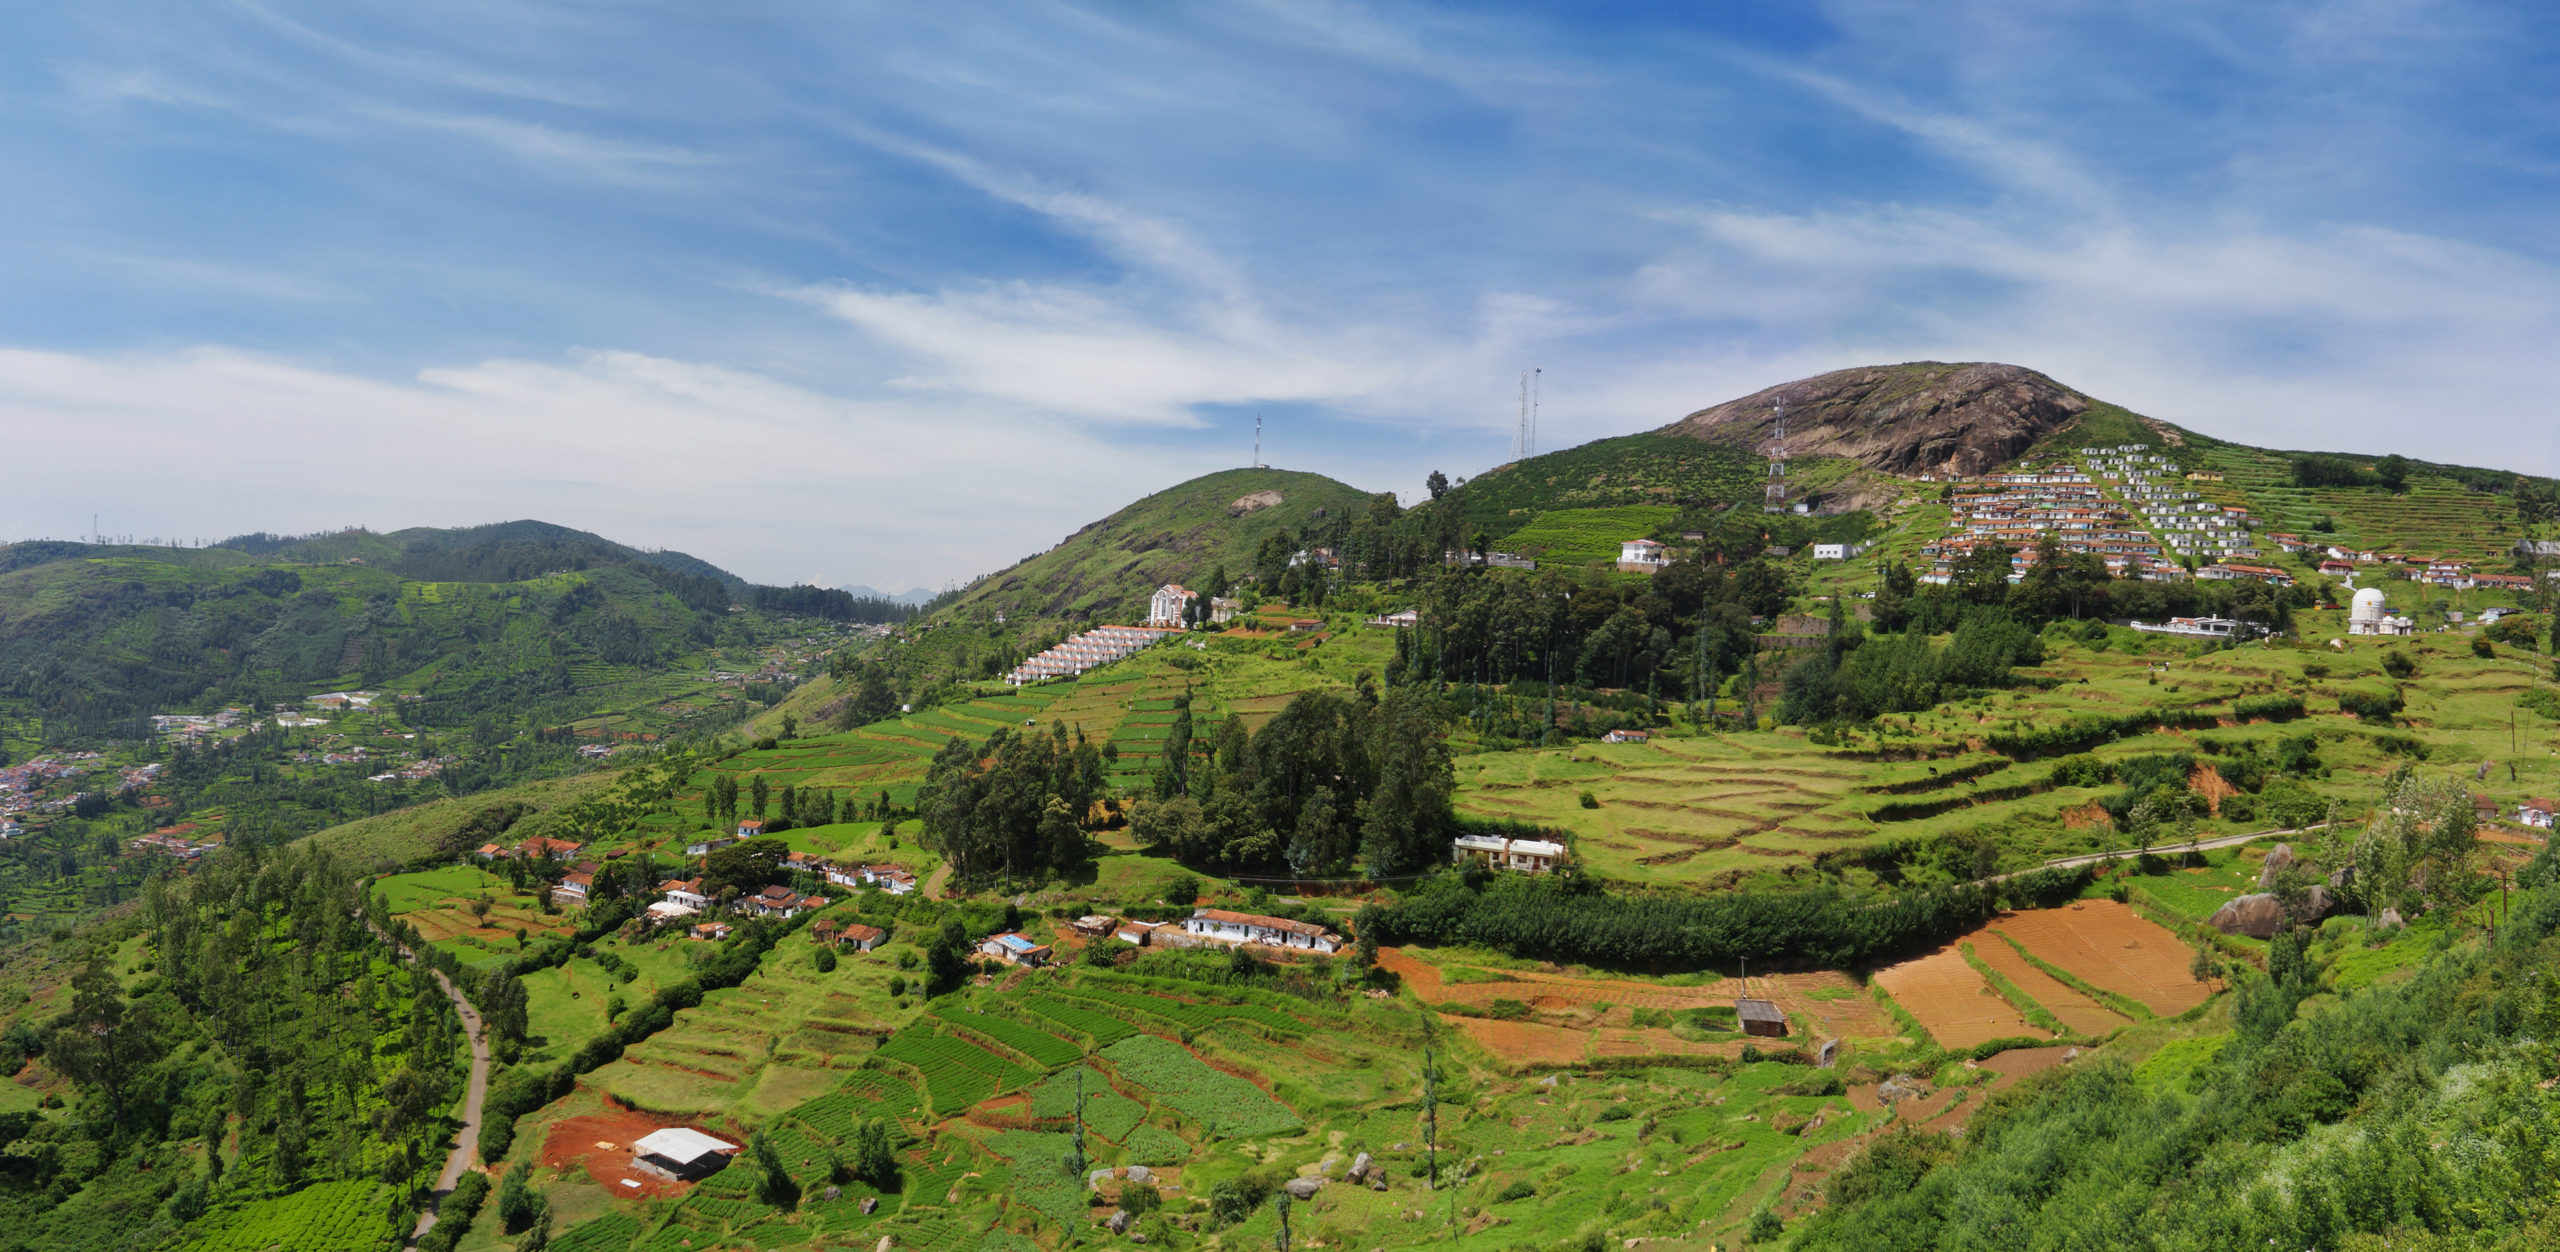 Enjoy extraordinary Indian landscapes like these lushly planted slopes in Ooty when you take a tailor-made holiday with Alfred&.